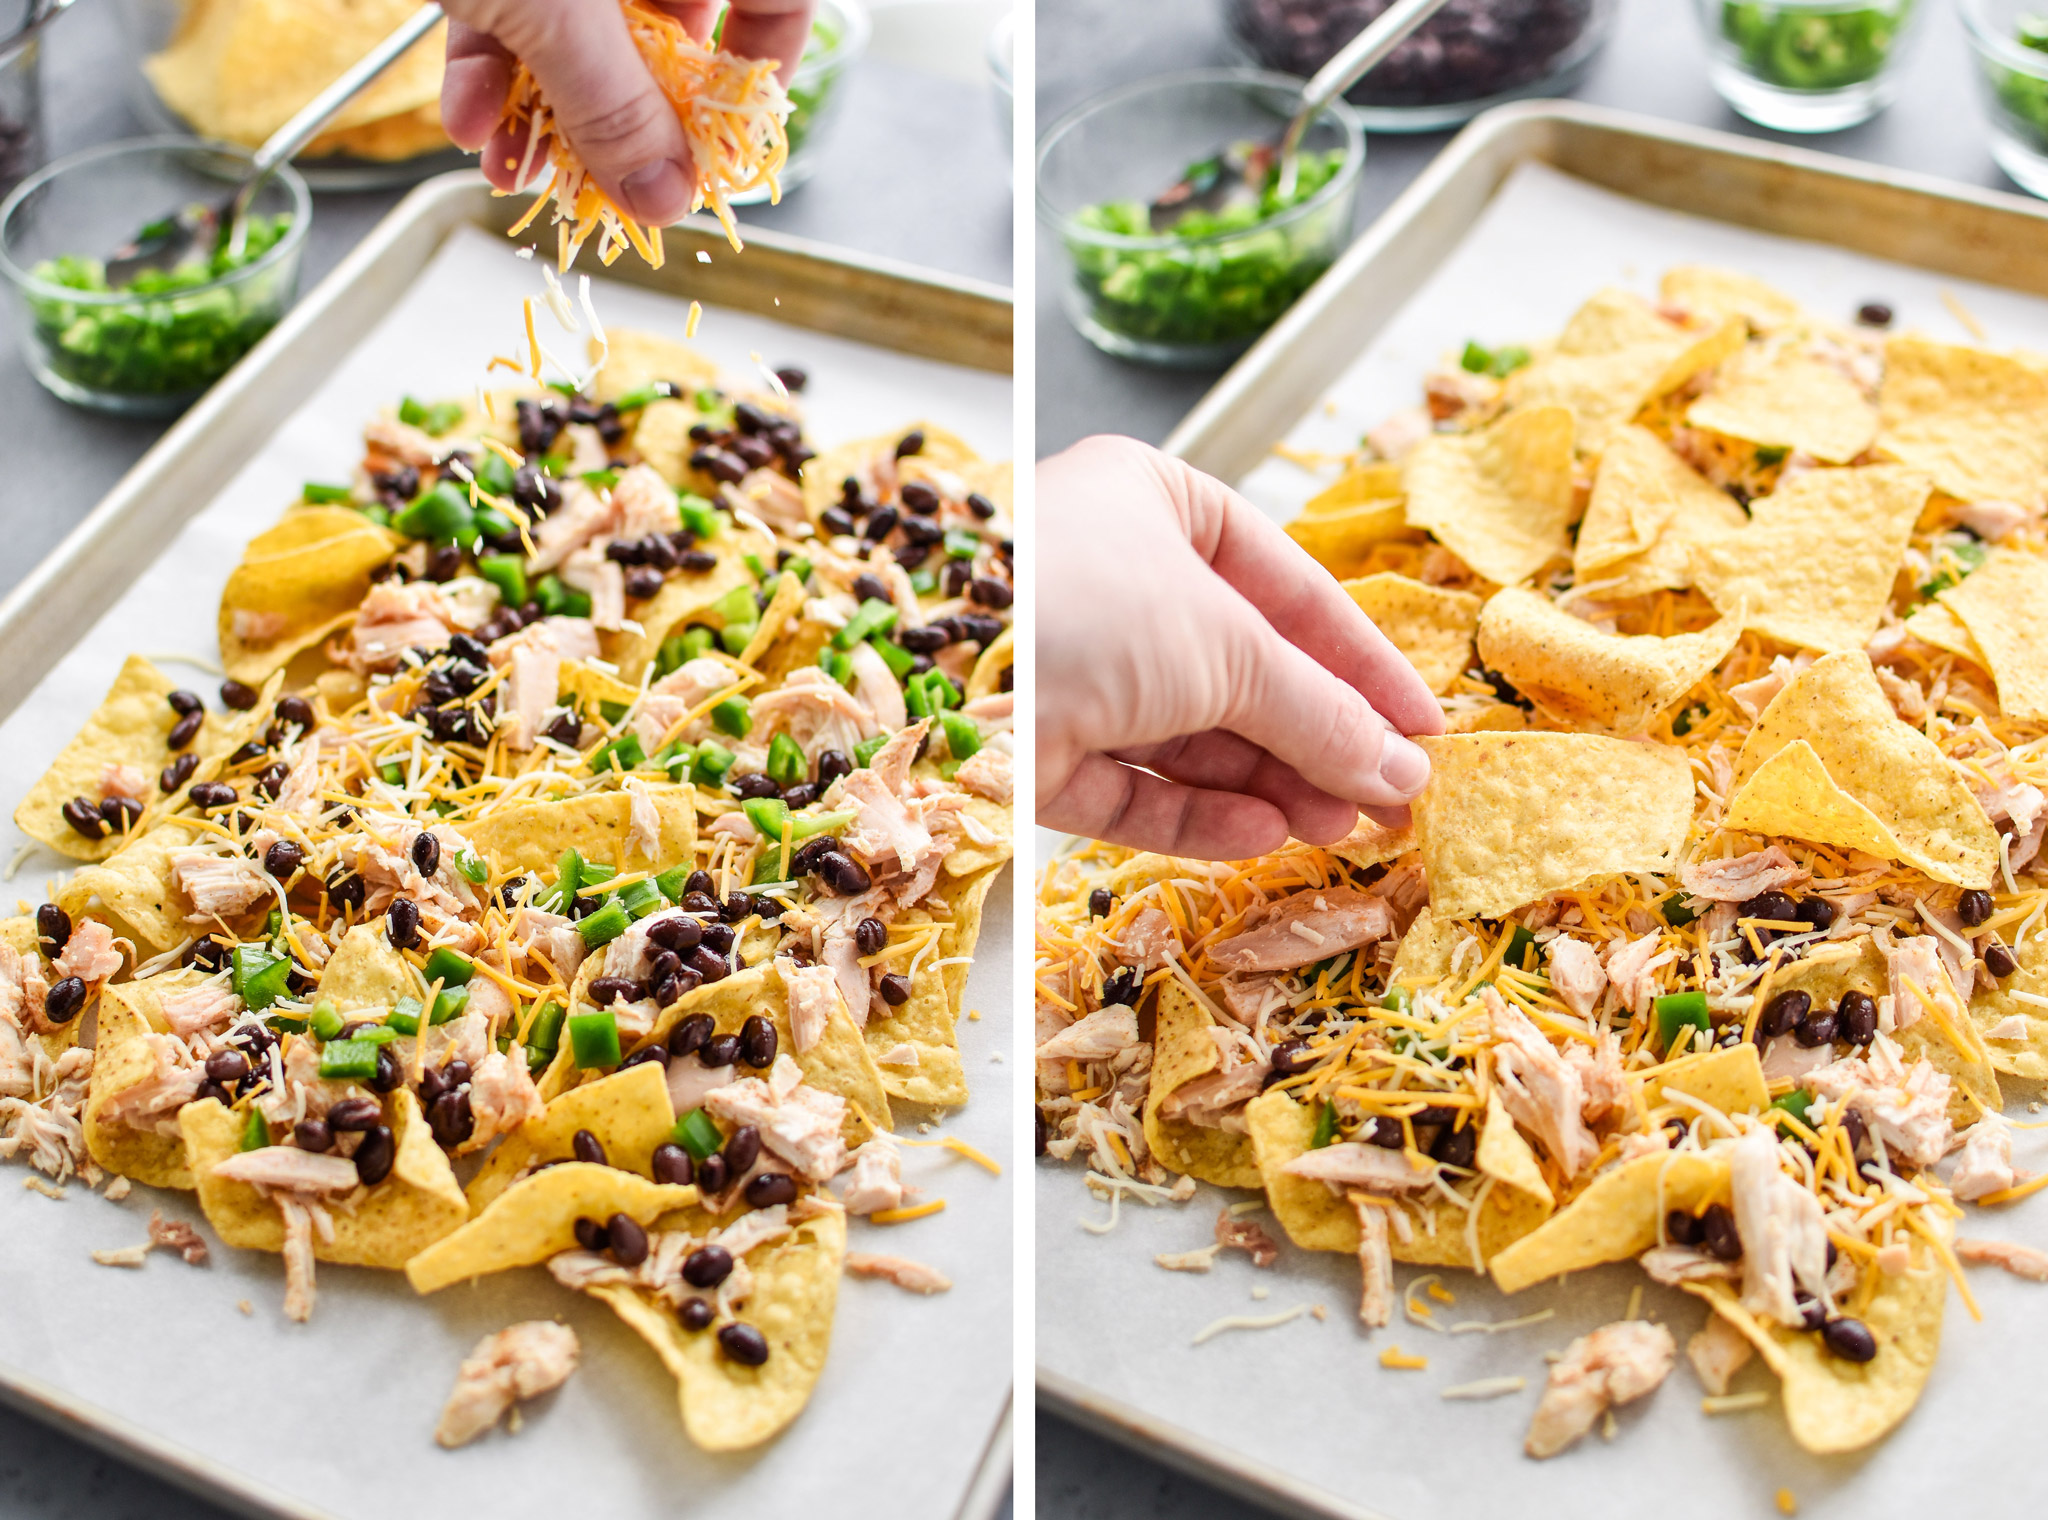 Adding cheese and then topping with a second layer of tortilla chips - prep ahead rotisserie chicken nachos.